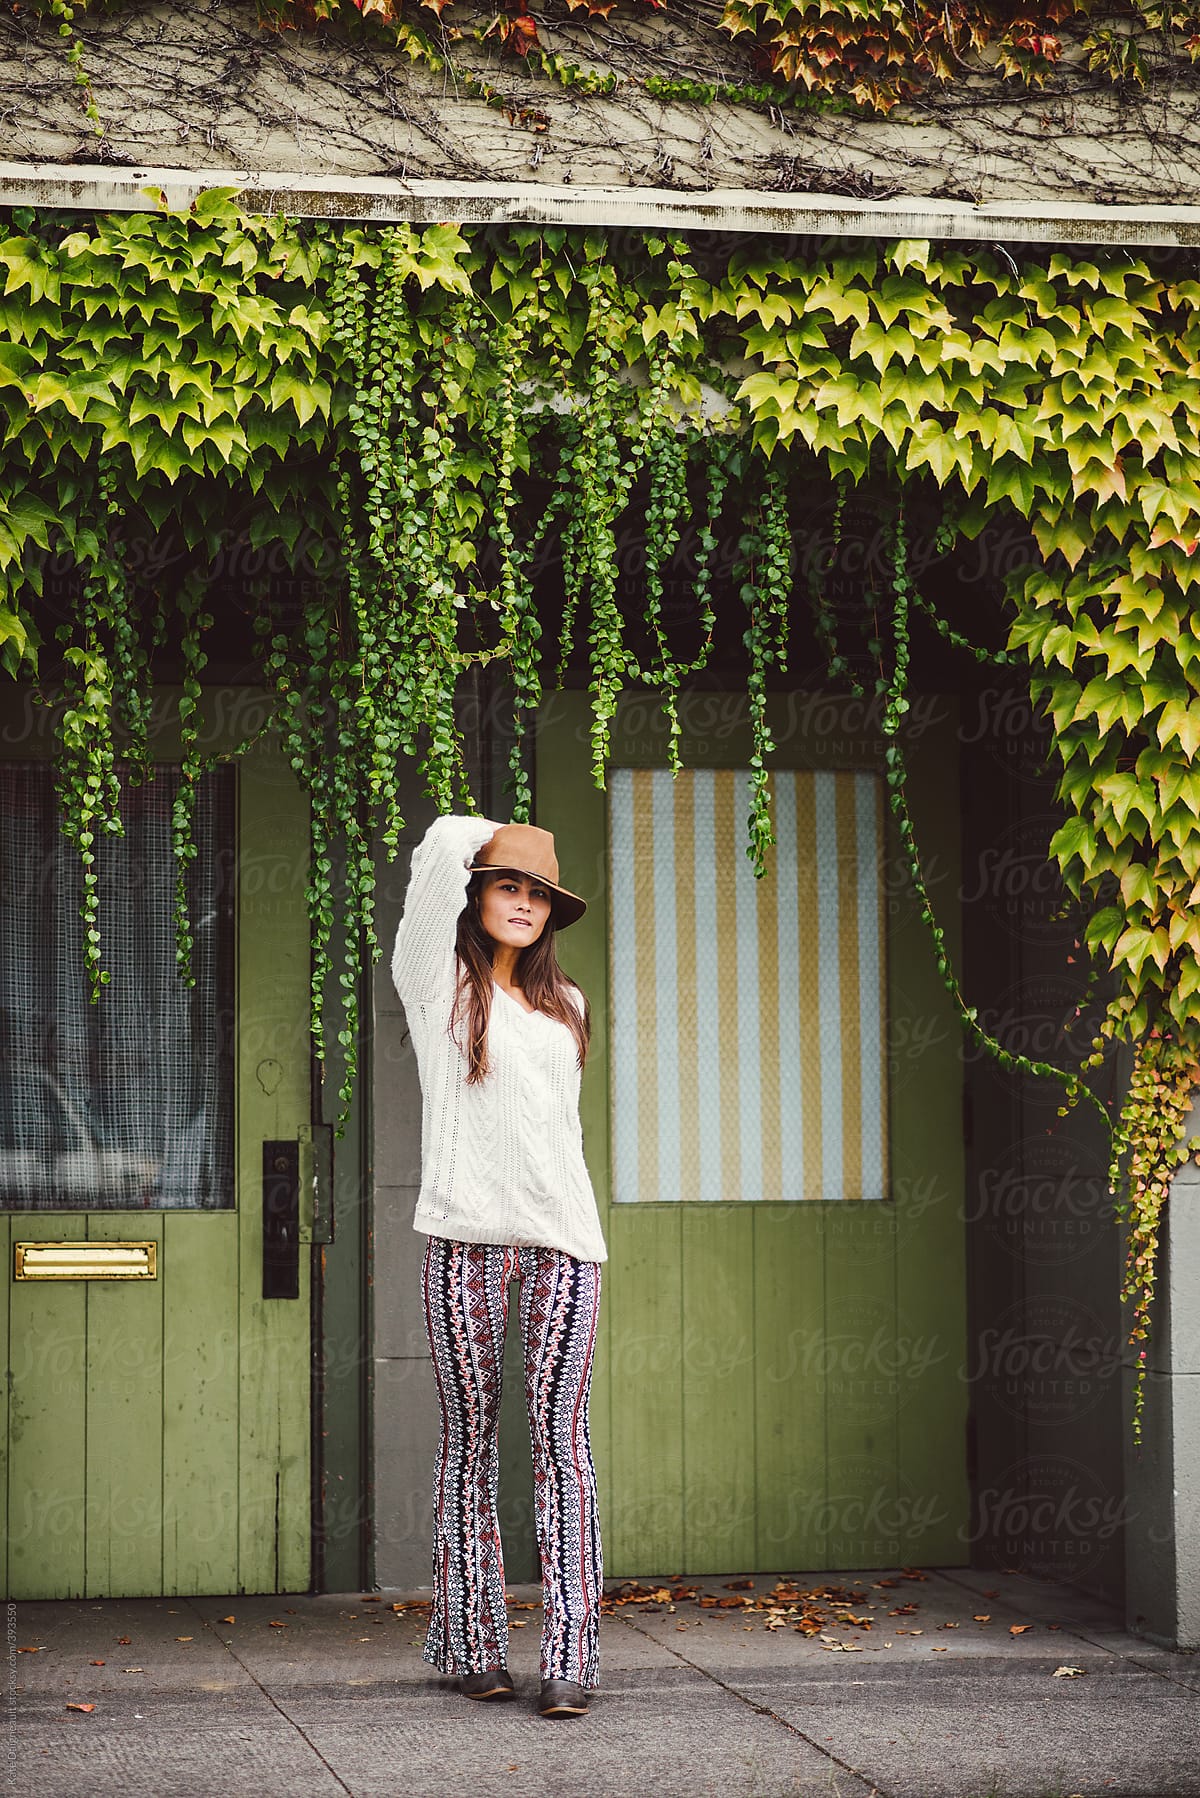 Beautiful Young Woman Dressed Stylishly Standing In Ivy Doorway By Stocksy Contributor Kate 4025